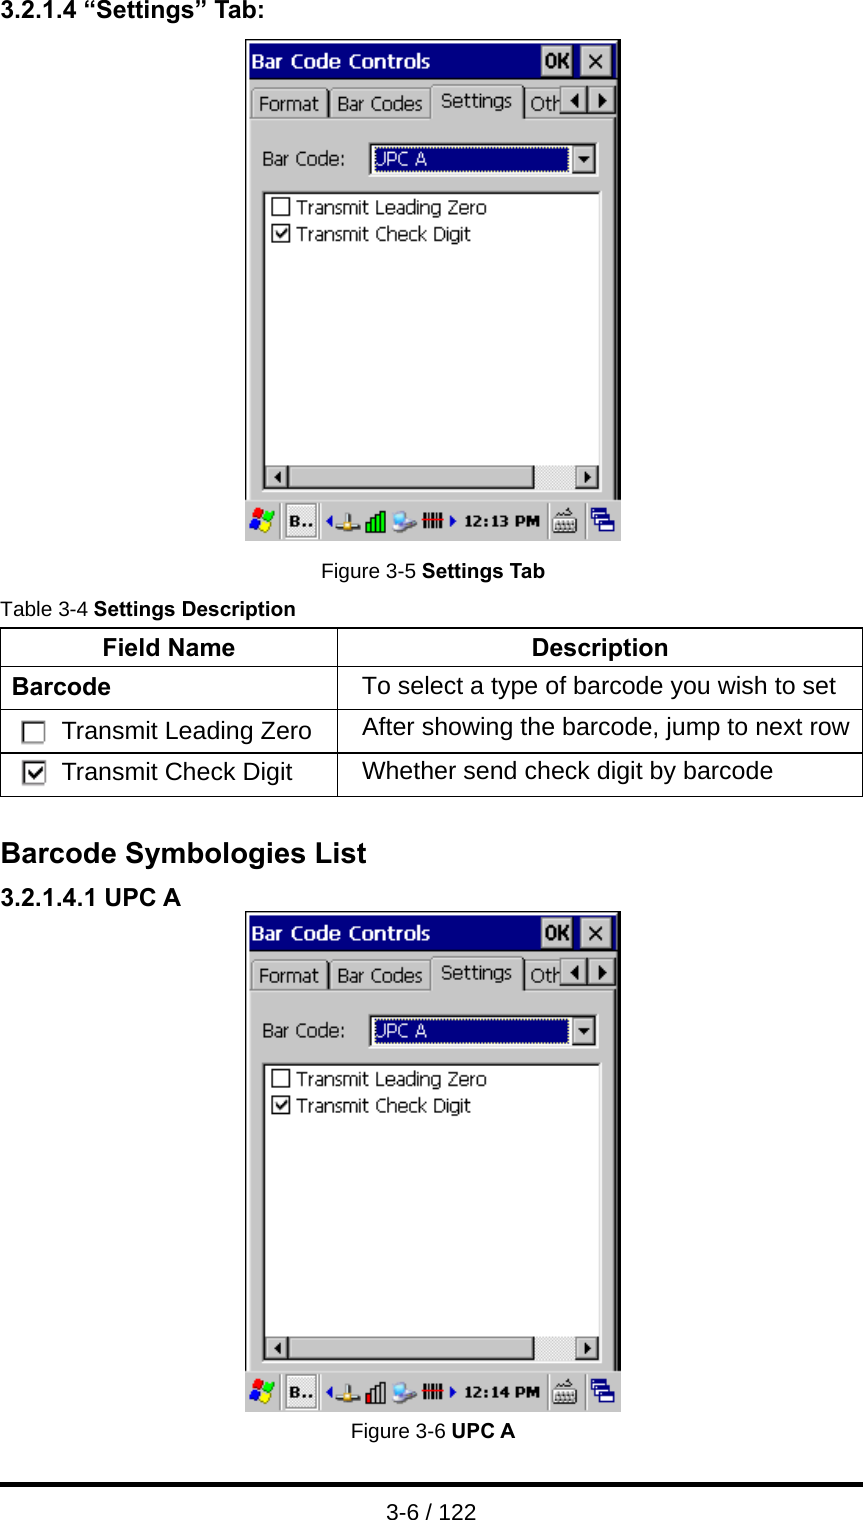  3-6 / 122 3.2.1.4 “Settings” Tab:  Figure 3-5 Settings Tab Table 3-4 Settings Description Field Name  Description Barcode  To select a type of barcode you wish to set Transmit Leading Zero  After showing the barcode, jump to next rowTransmit Check Digit  Whether send check digit by barcode  Barcode Symbologies List 3.2.1.4.1 UPC A  Figure 3-6 UPC A 